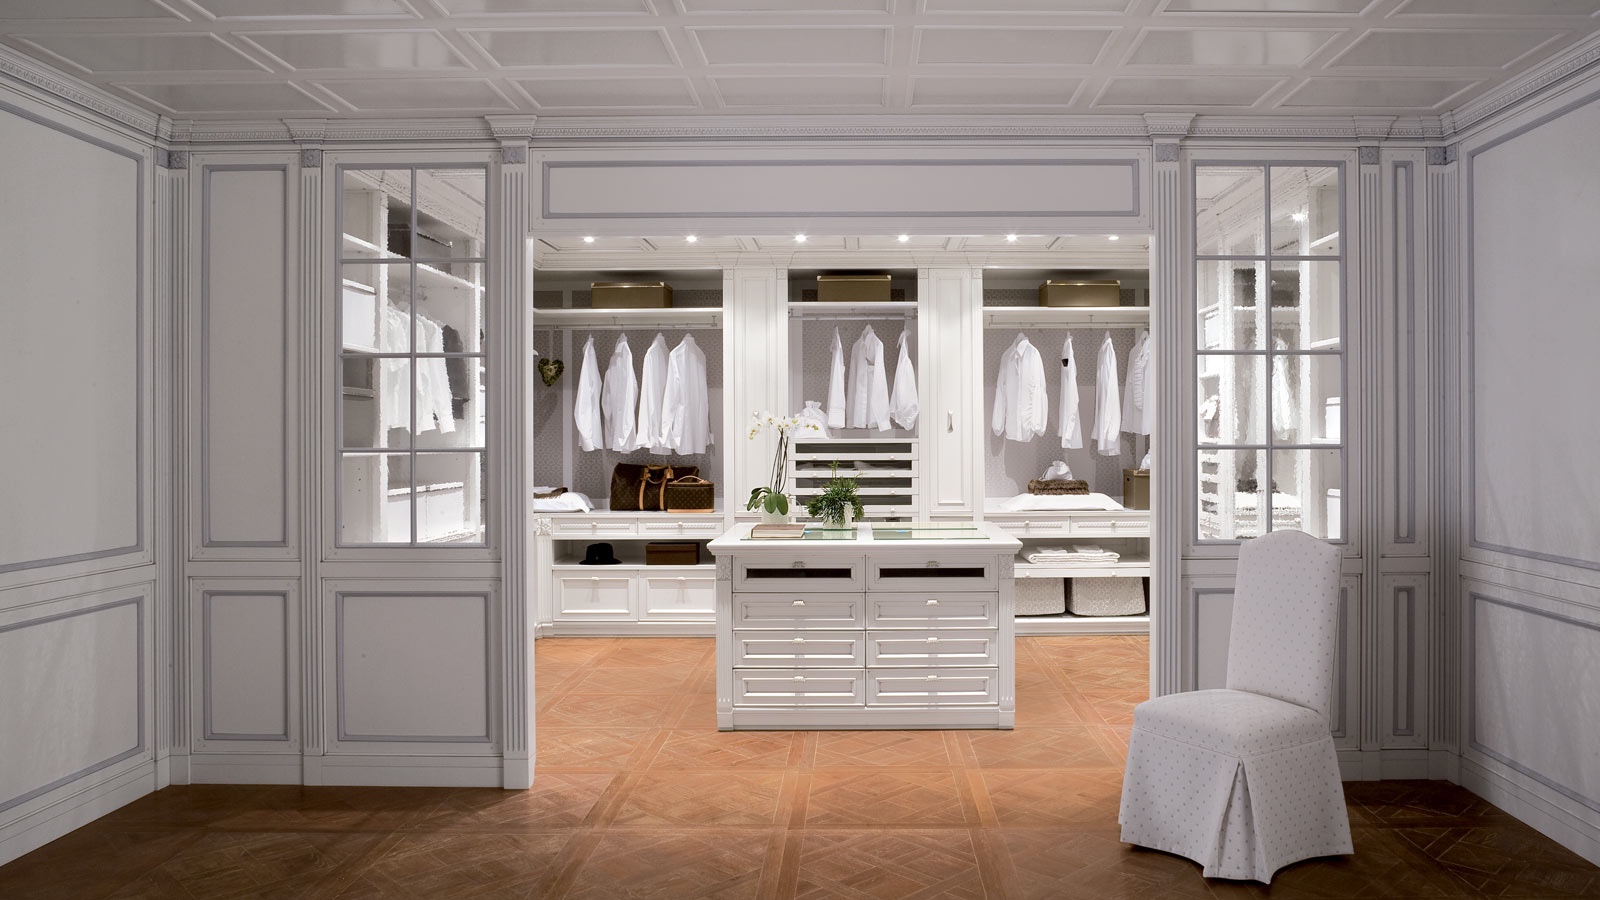 pleasing-winning-furniture-awesome-white-walk-in-closet-design-inspiration-with-white-clothes-and-brown-floor-tile-best-walk-in-closet-design-inspirat